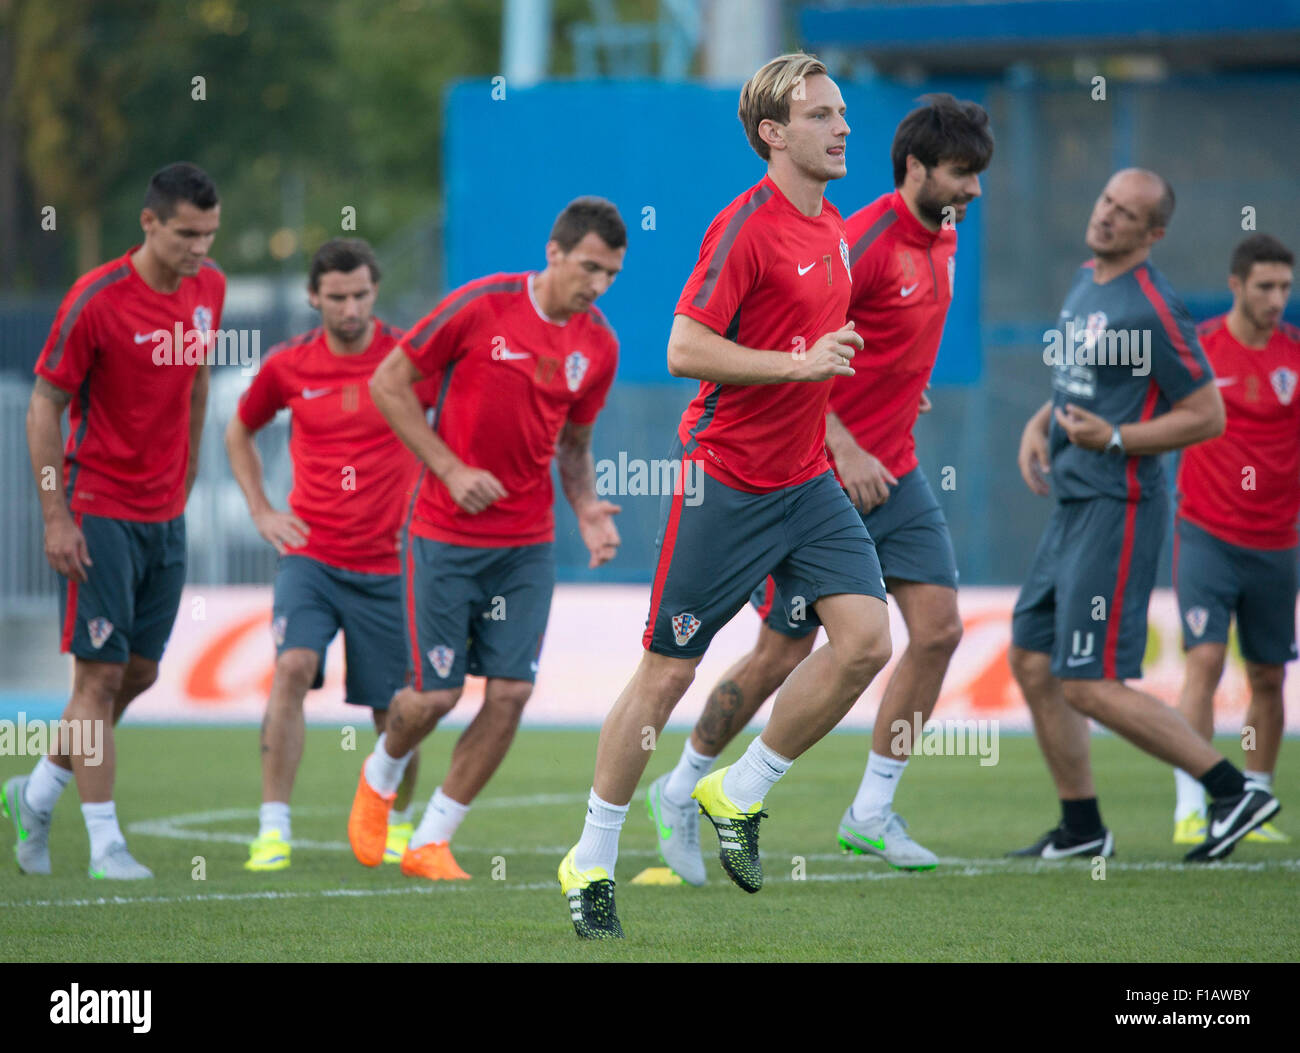 Zagreb, Croatia. 31st Aug, 2015. Ivan Rakitic (front) of Croatia attends a training session with his teammates ahead of the Euro 2016 qualifiers against Azerbaijan at Maksimir stadium in Zagreb, Croatia, Aug. 31, 2015. Credit:  Miso Lisanin/Xinhua/Alamy Live News Stock Photo